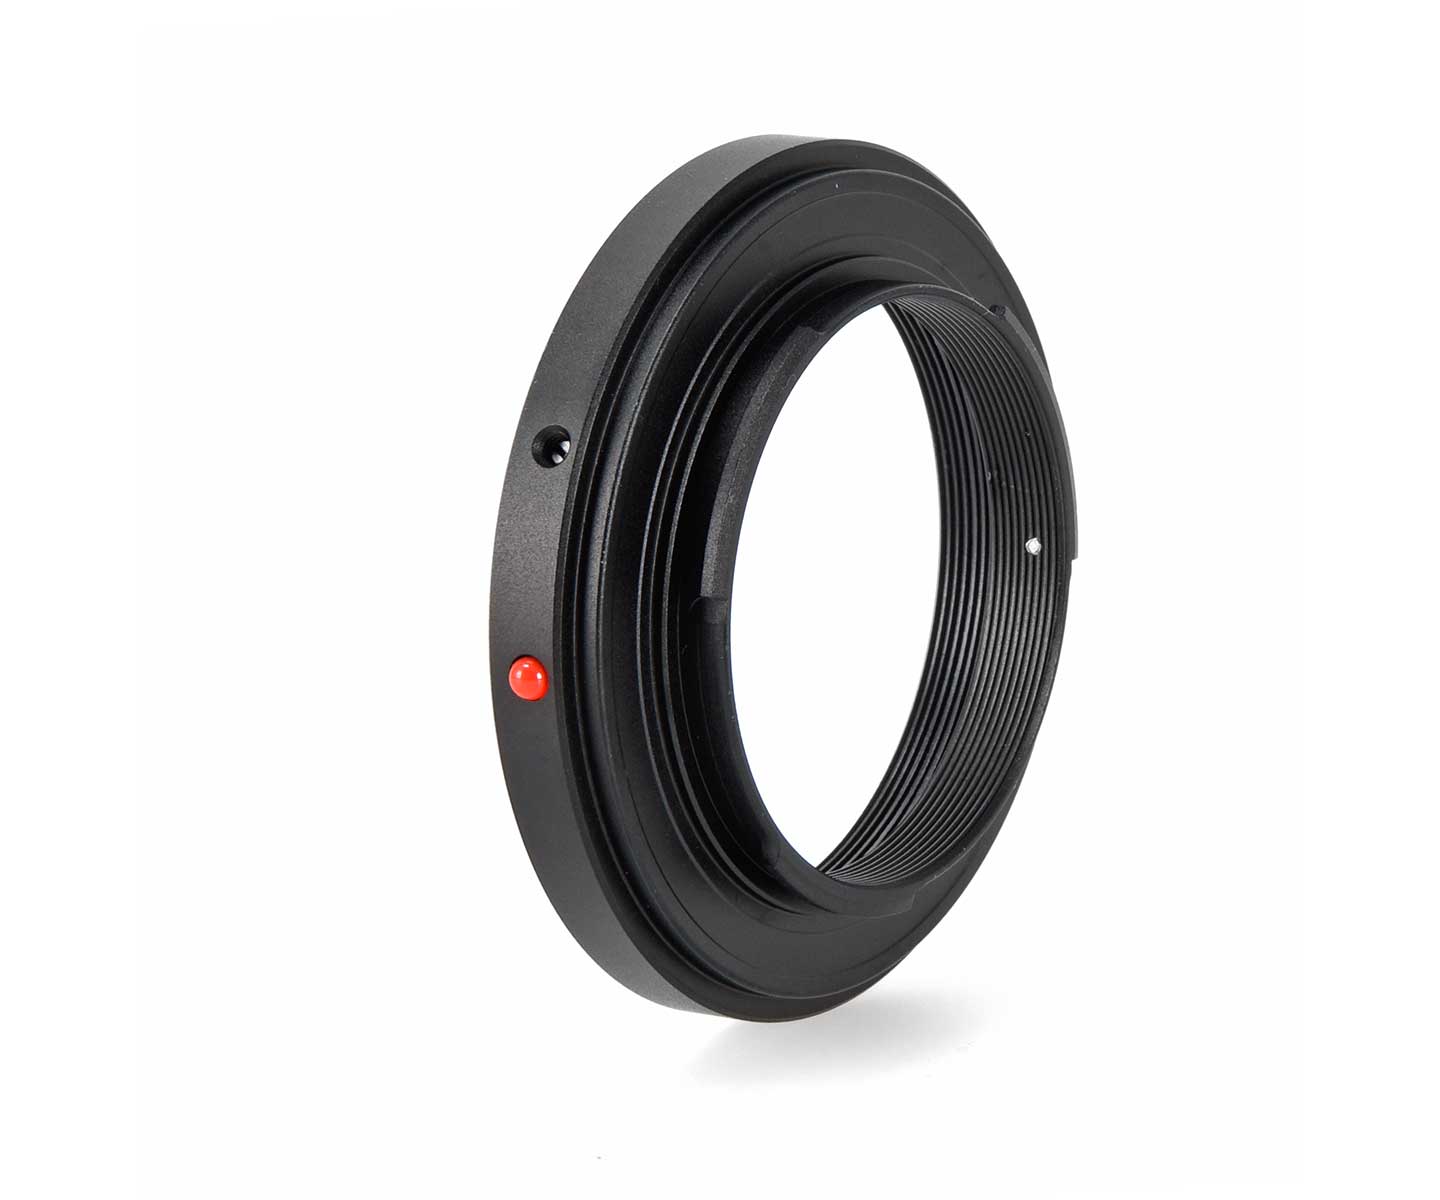  TS short M48 adapter for connecting Sony Nex and Sony Alpha cameras to telescopes and camera lenses [EN] 